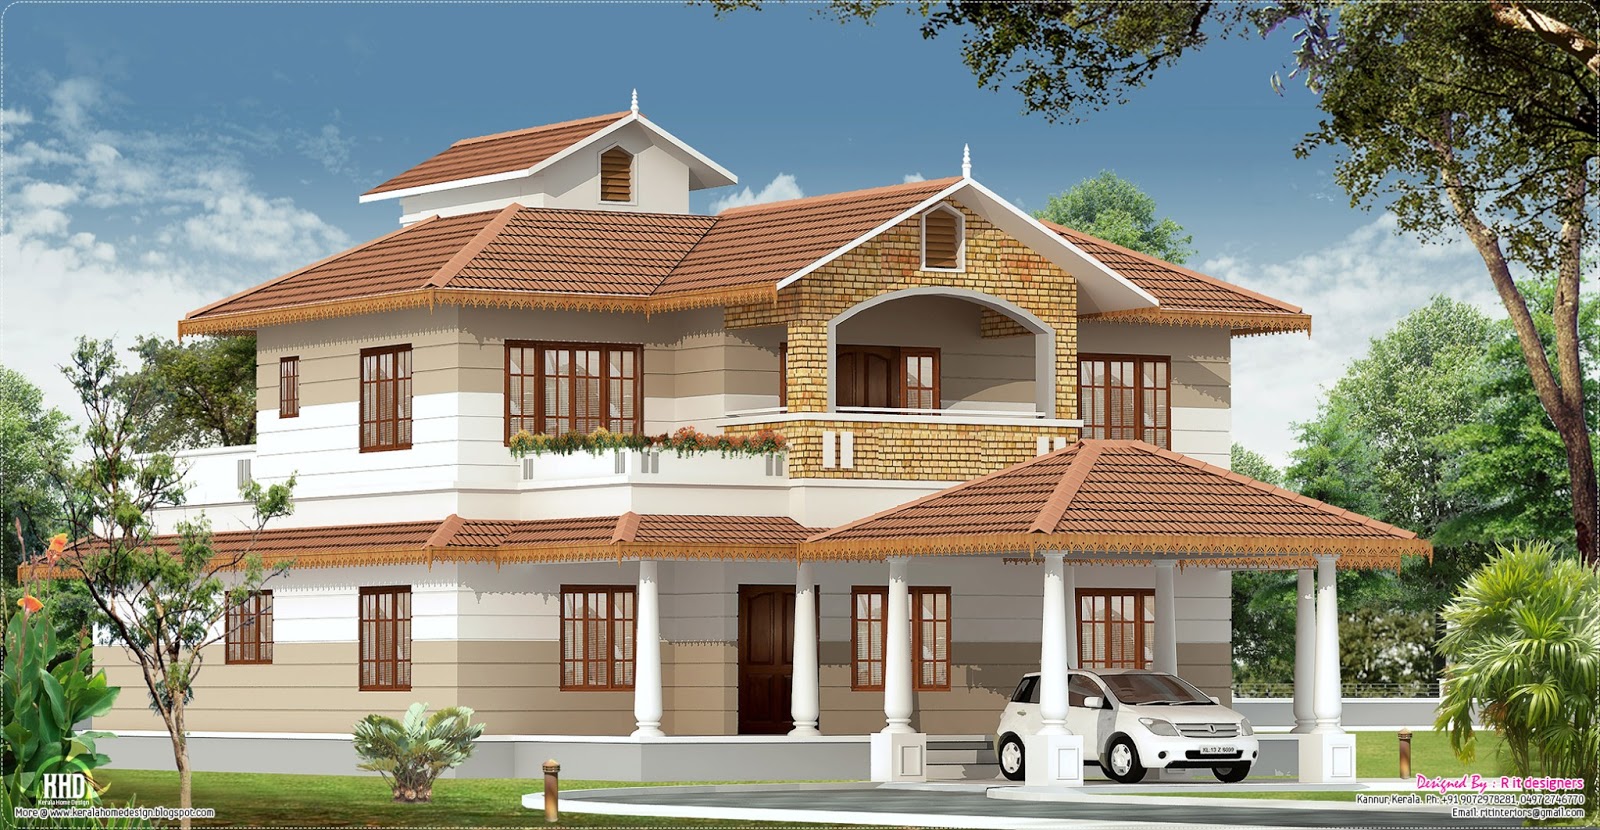  Kerala  Home  With Interior Designs  Style  House  3D Models